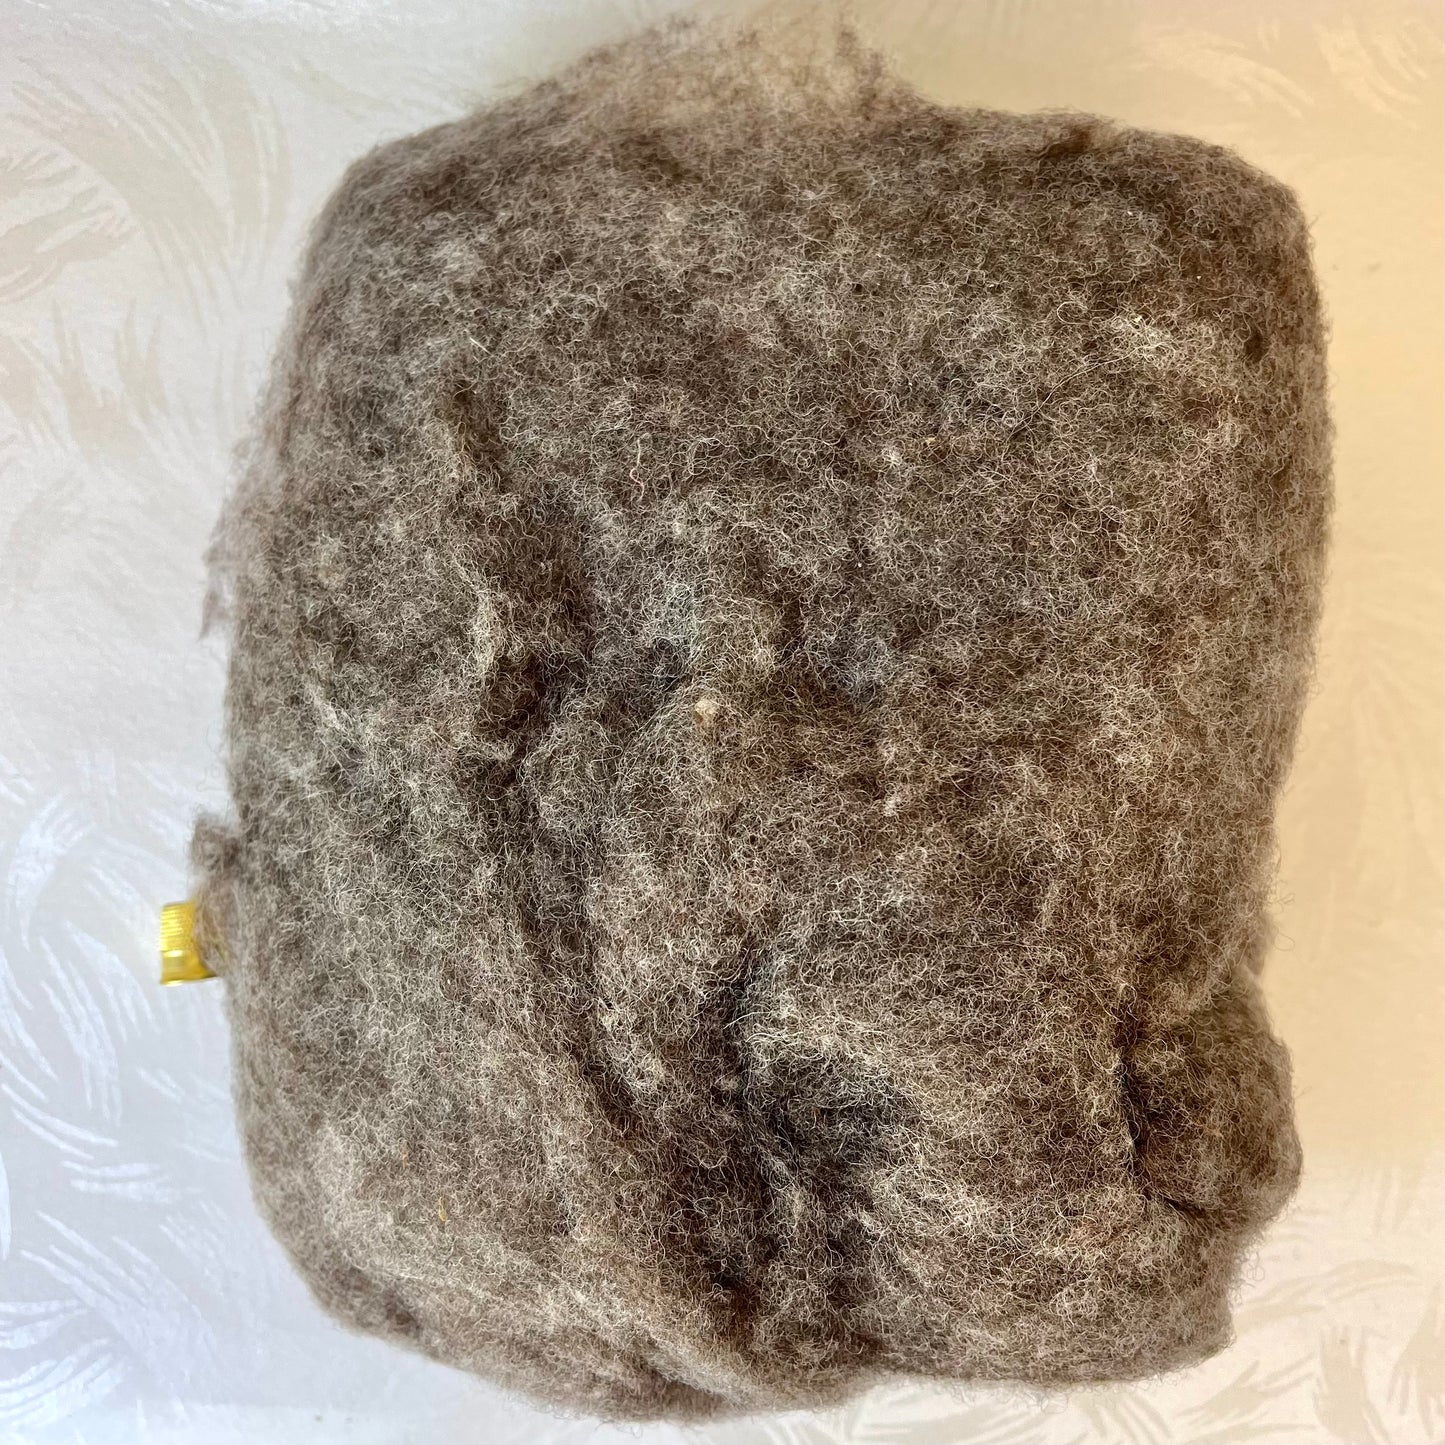 Wool for Stuffing